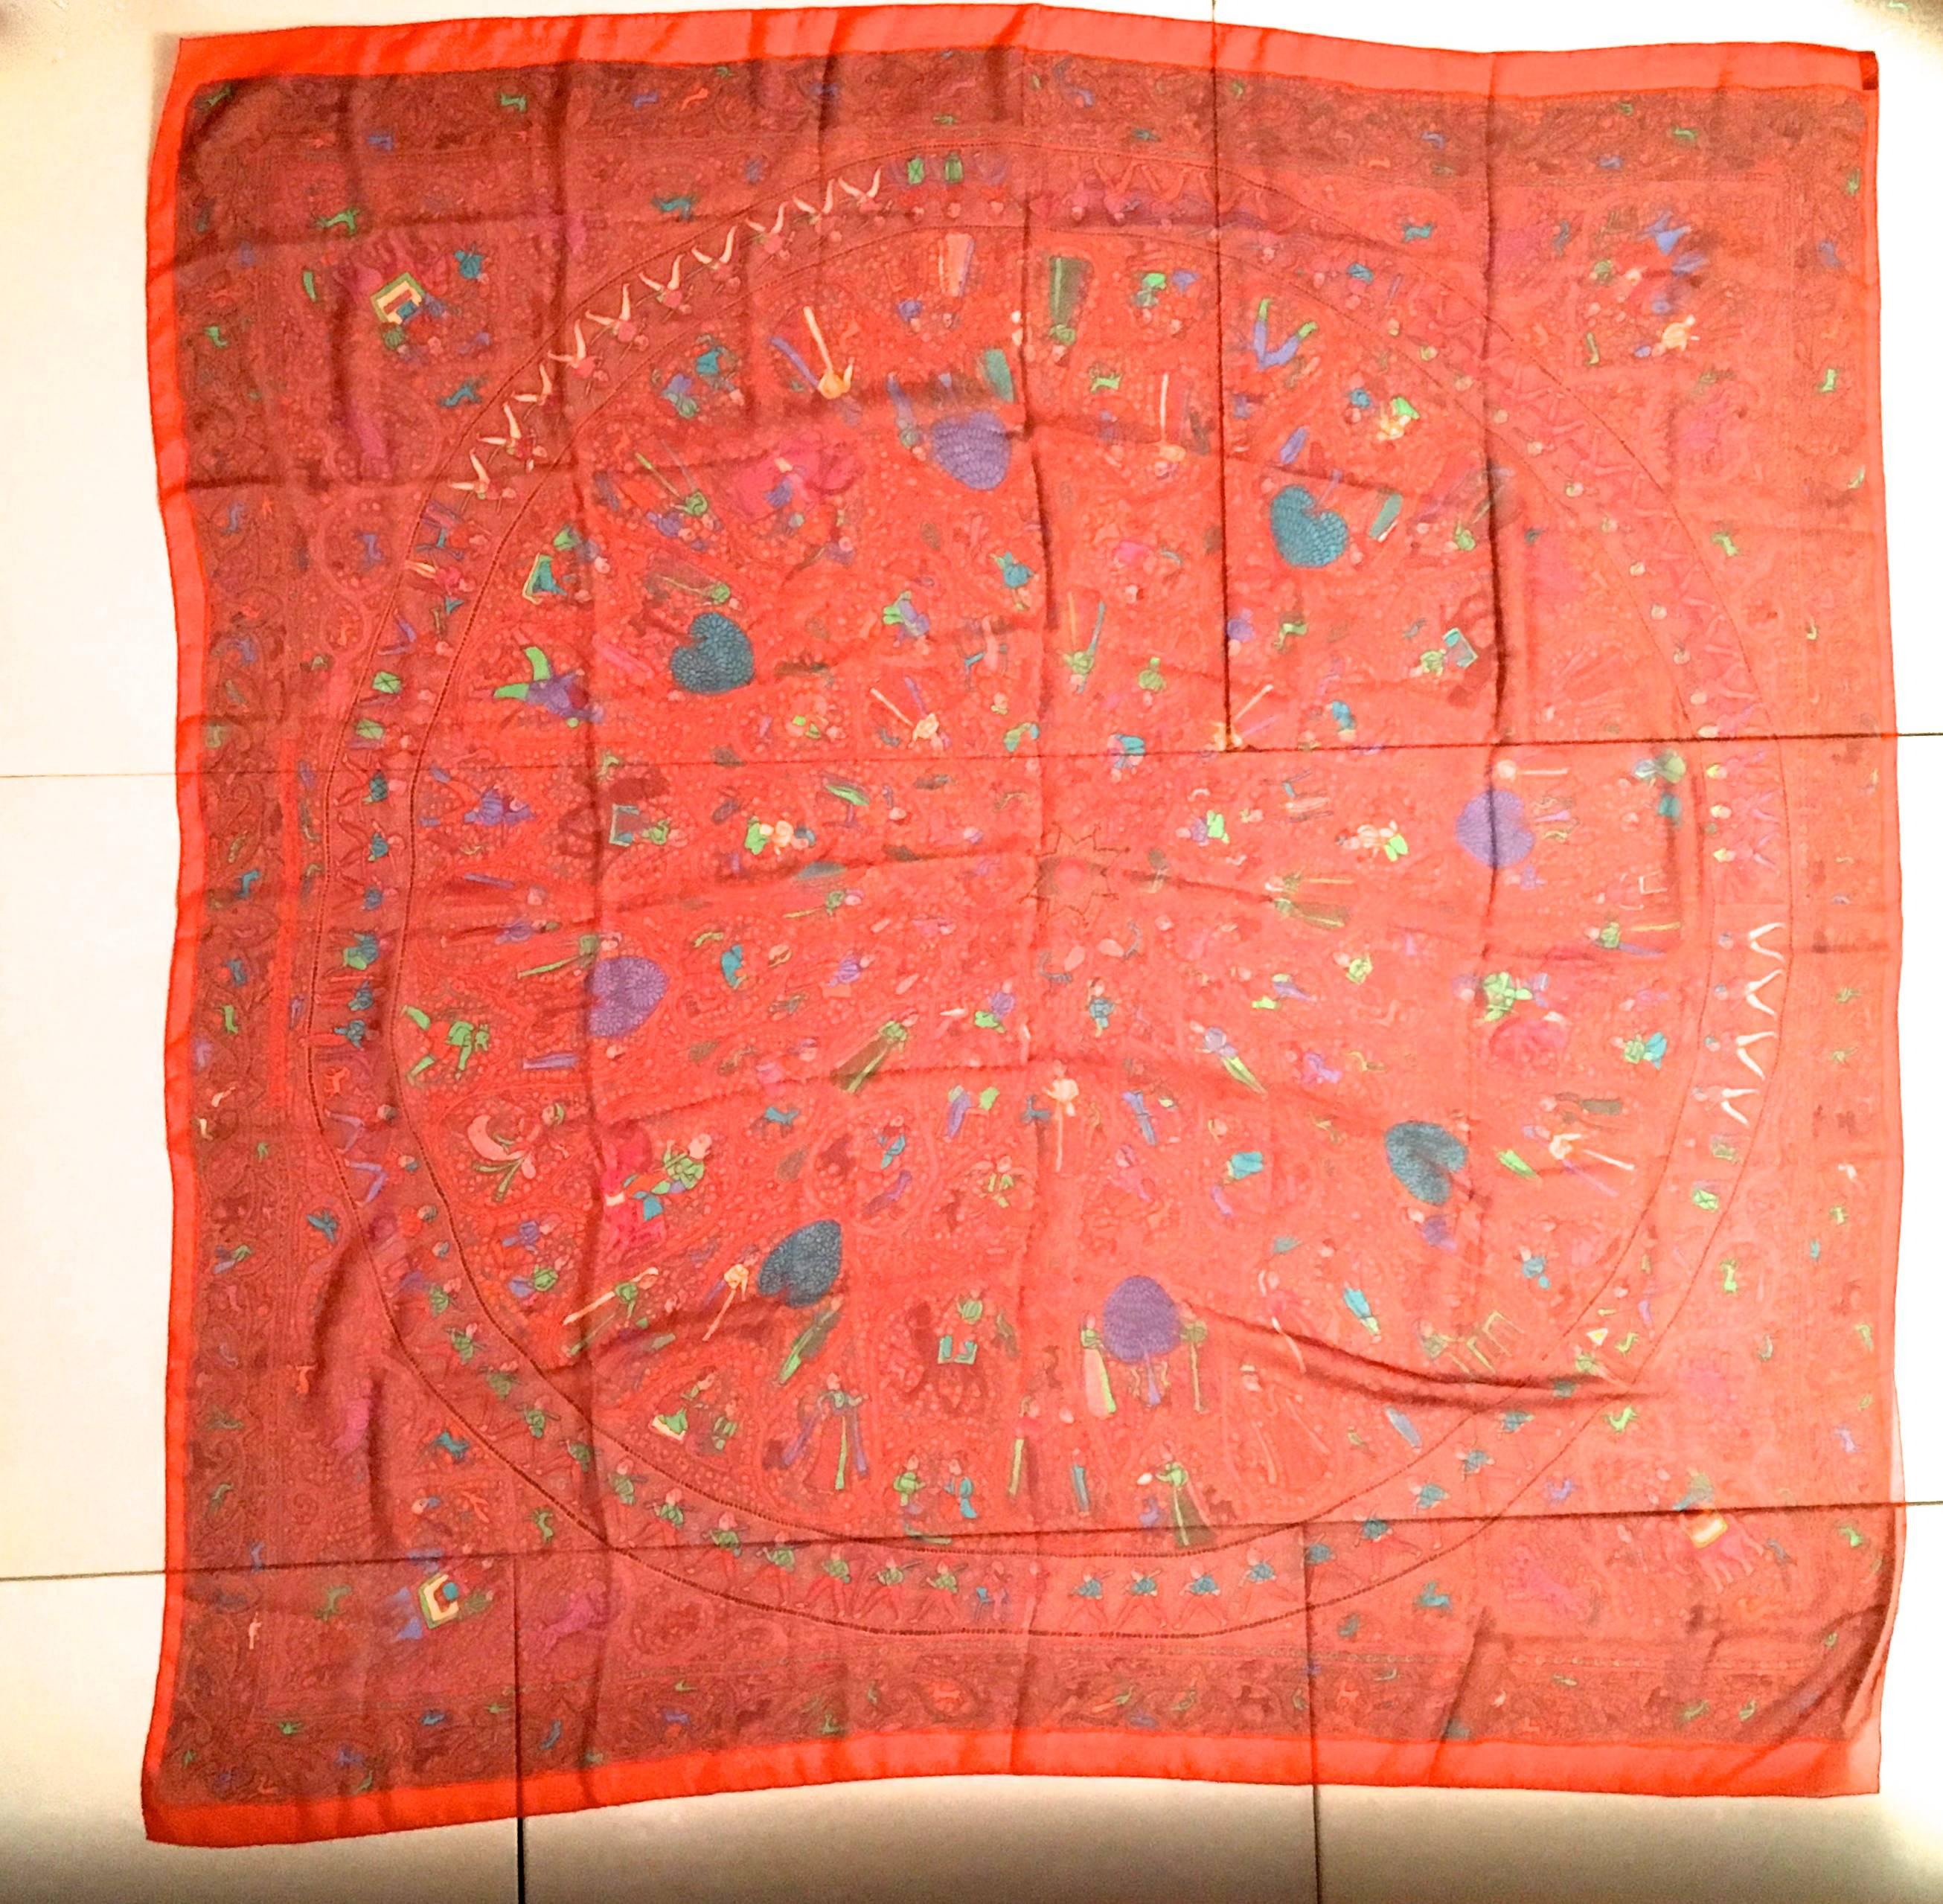 Red Rare Hermes Scarf - XL Size - 100% Silk Musselin 